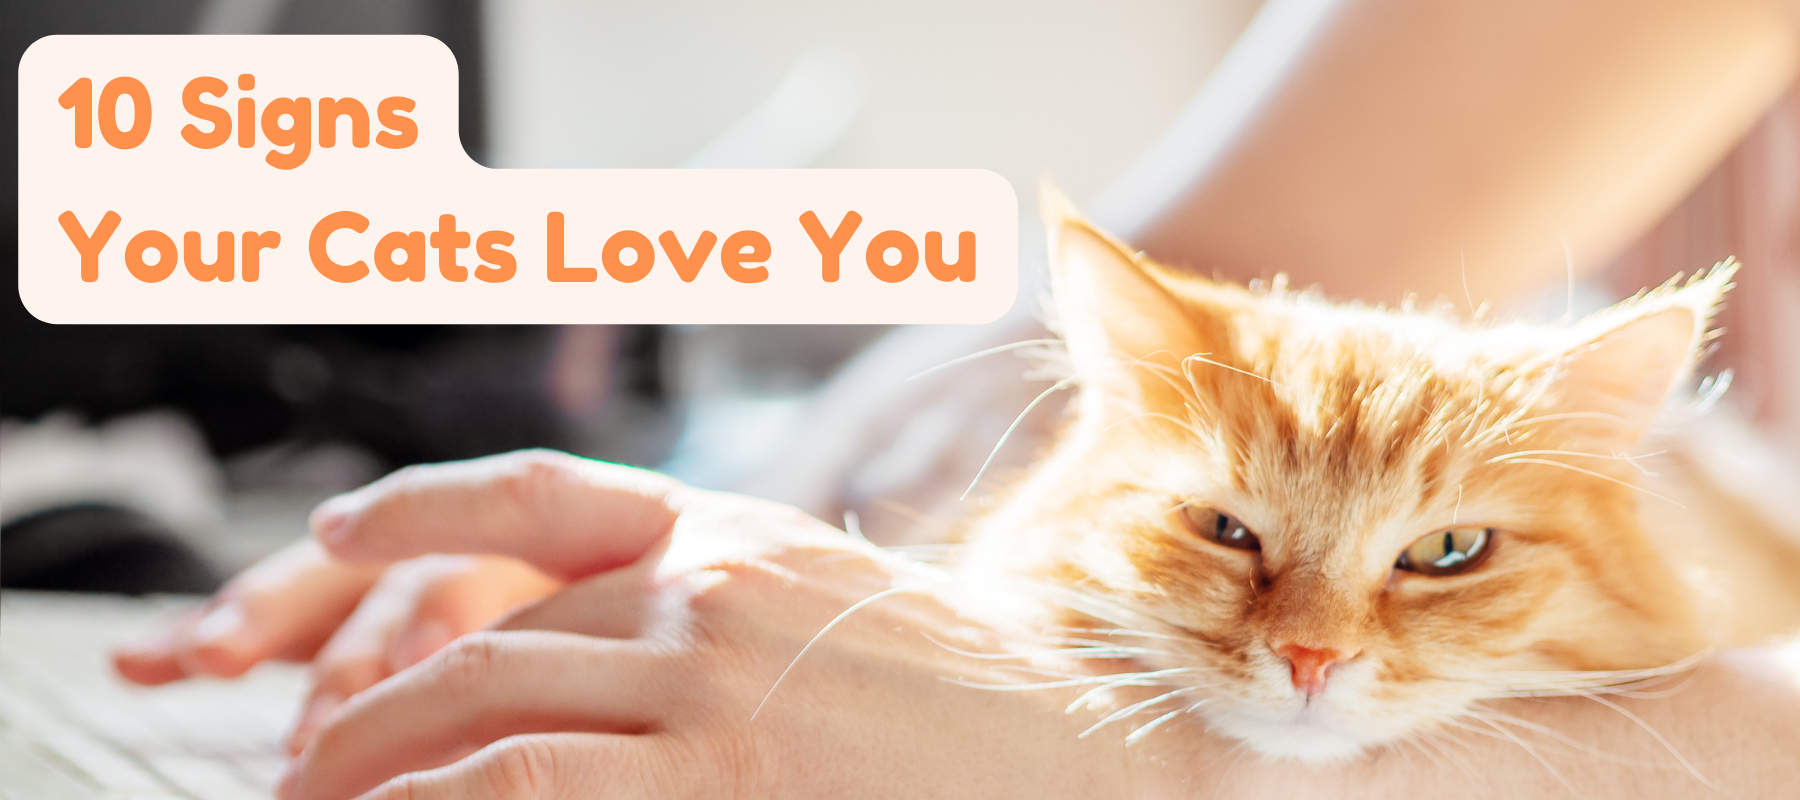 10 Signs Your Cats Love You